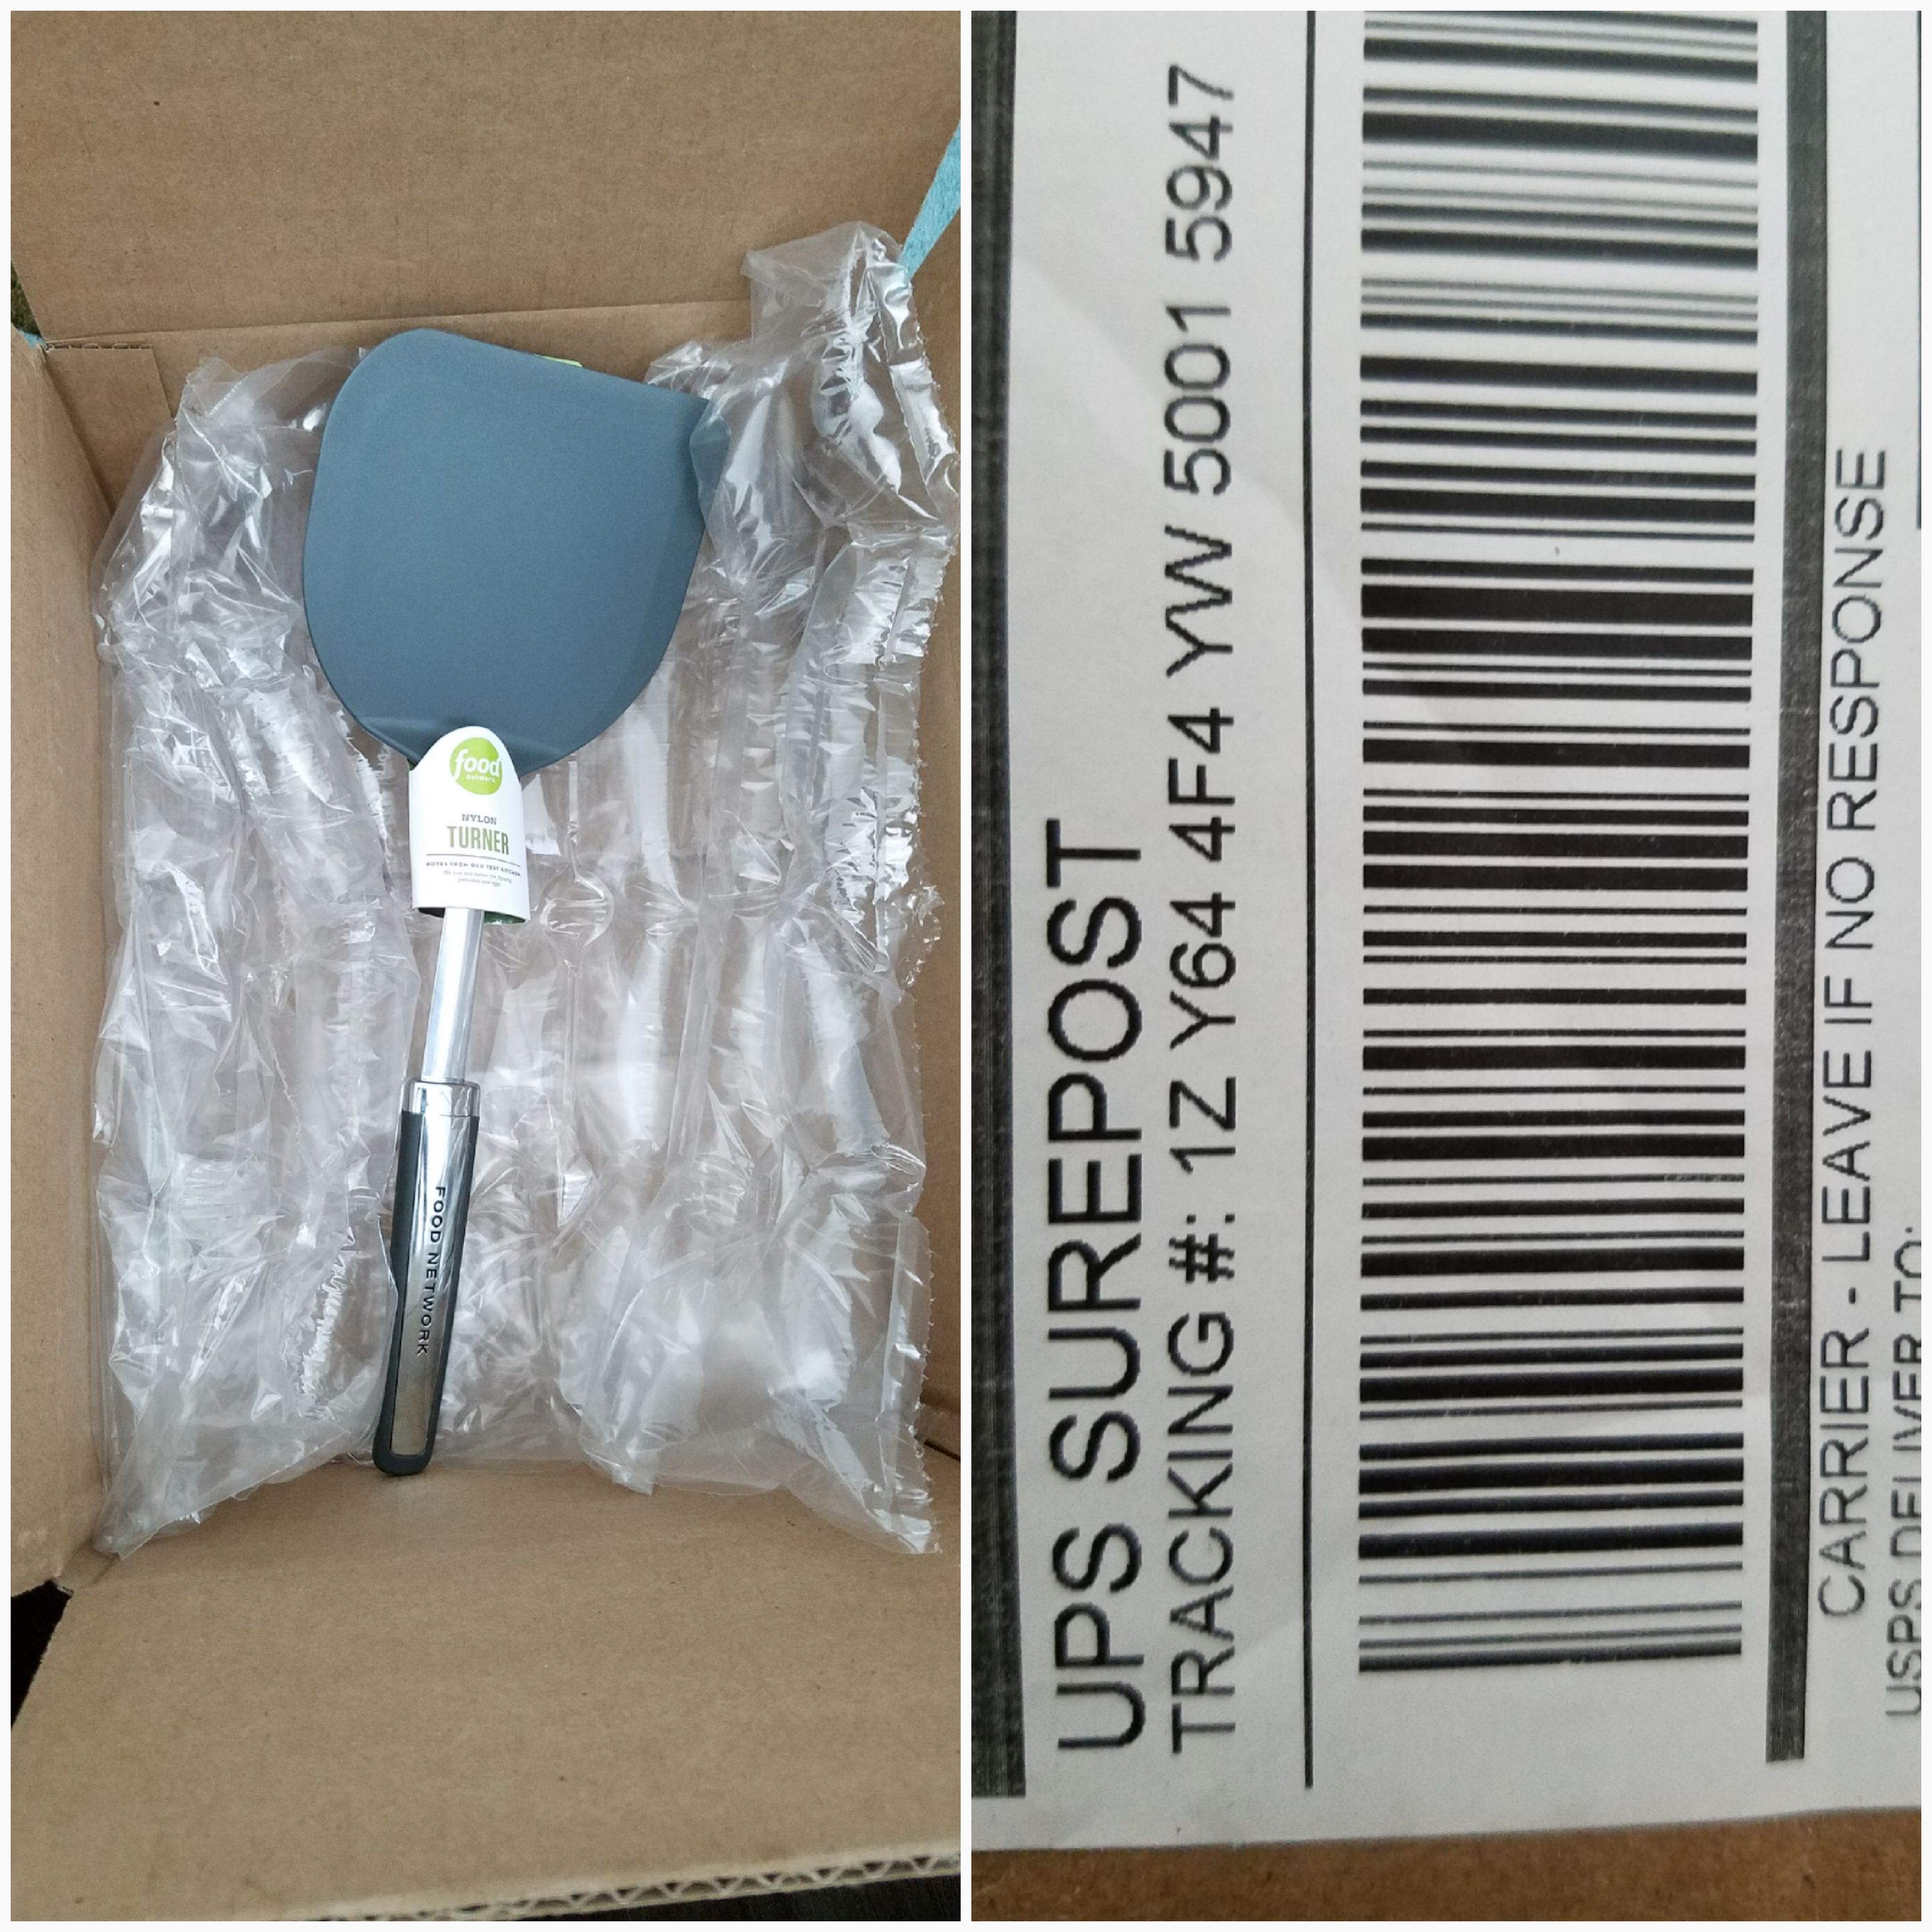 I purchased a Ninja 770 Blender from bluemoon.net, received a spatula from Kohl's? Countless emails to vendor, zero response. Escalated complaint to Paypal, they send UPS tracking # as "proof of deliv